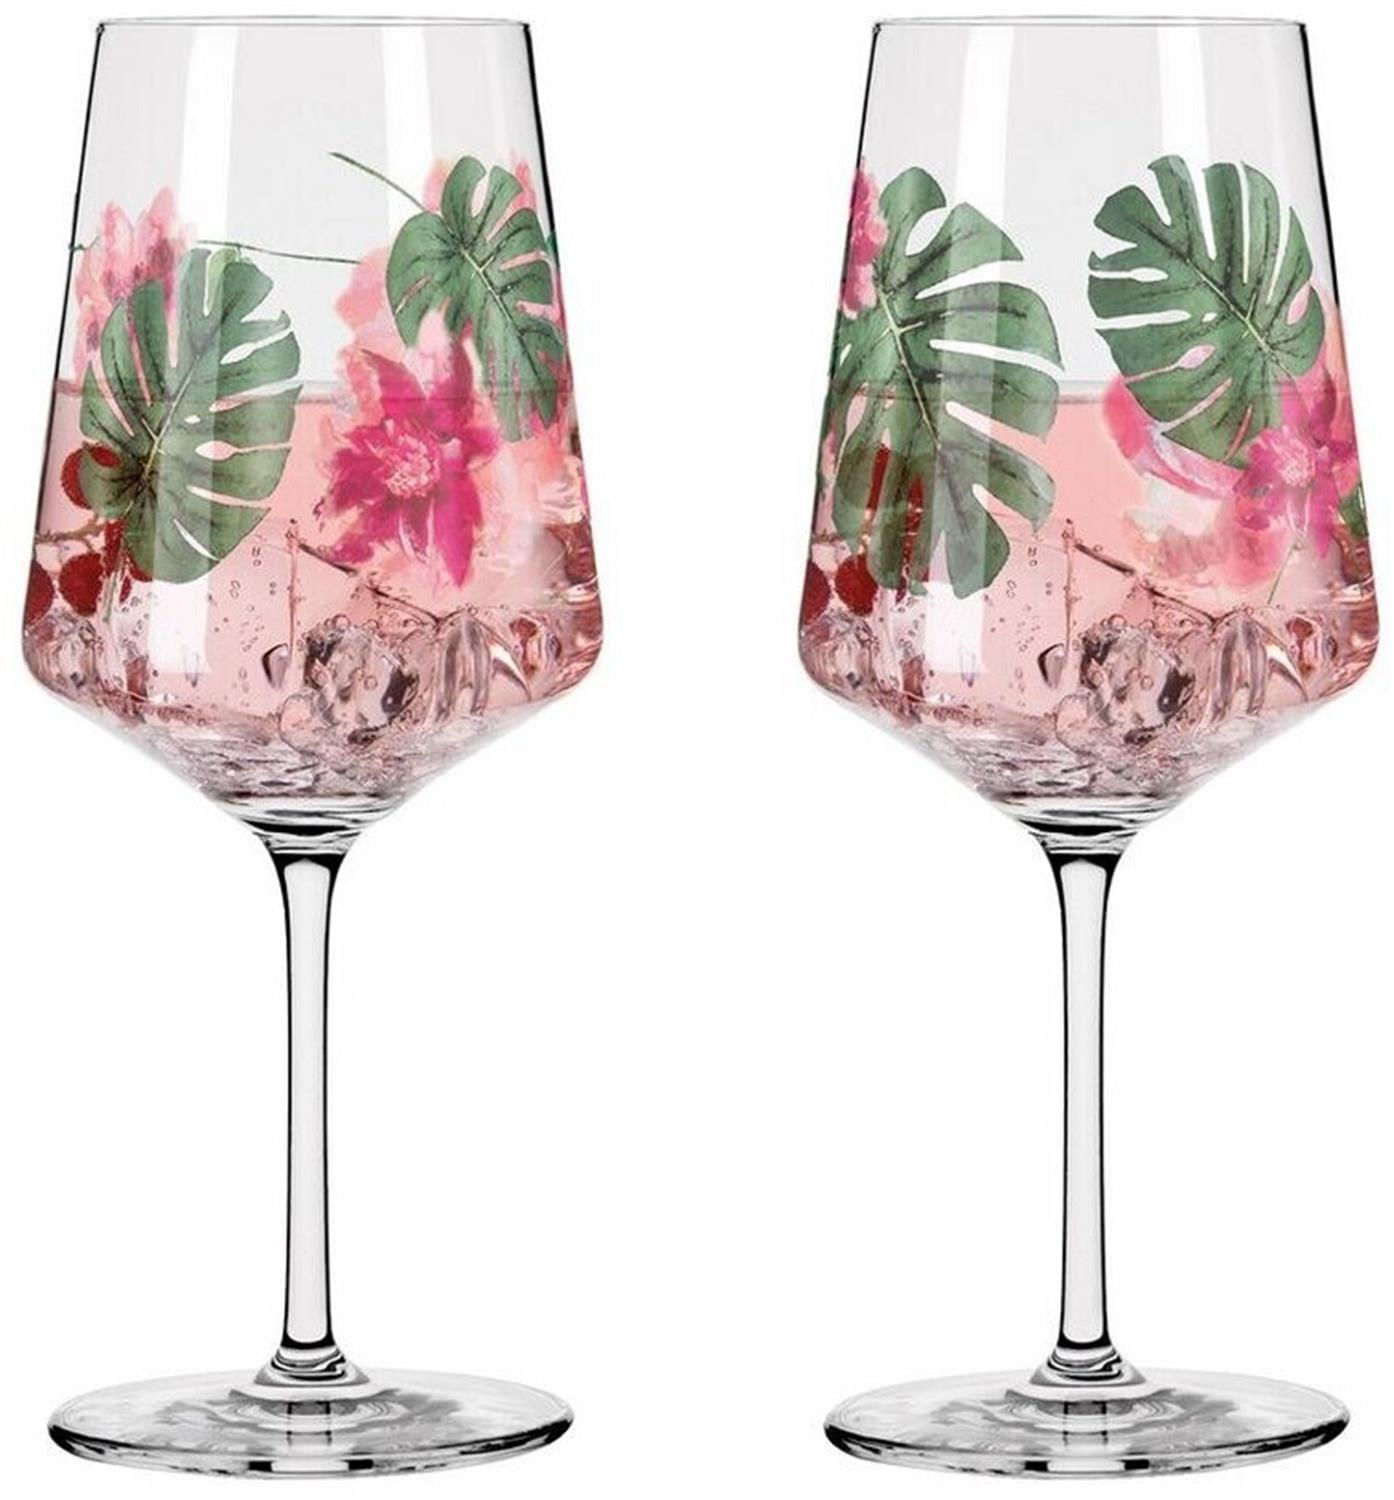 'Sommersonett Sprizz' aperitif glass, 54 cl, assorted pack of 2 pieces